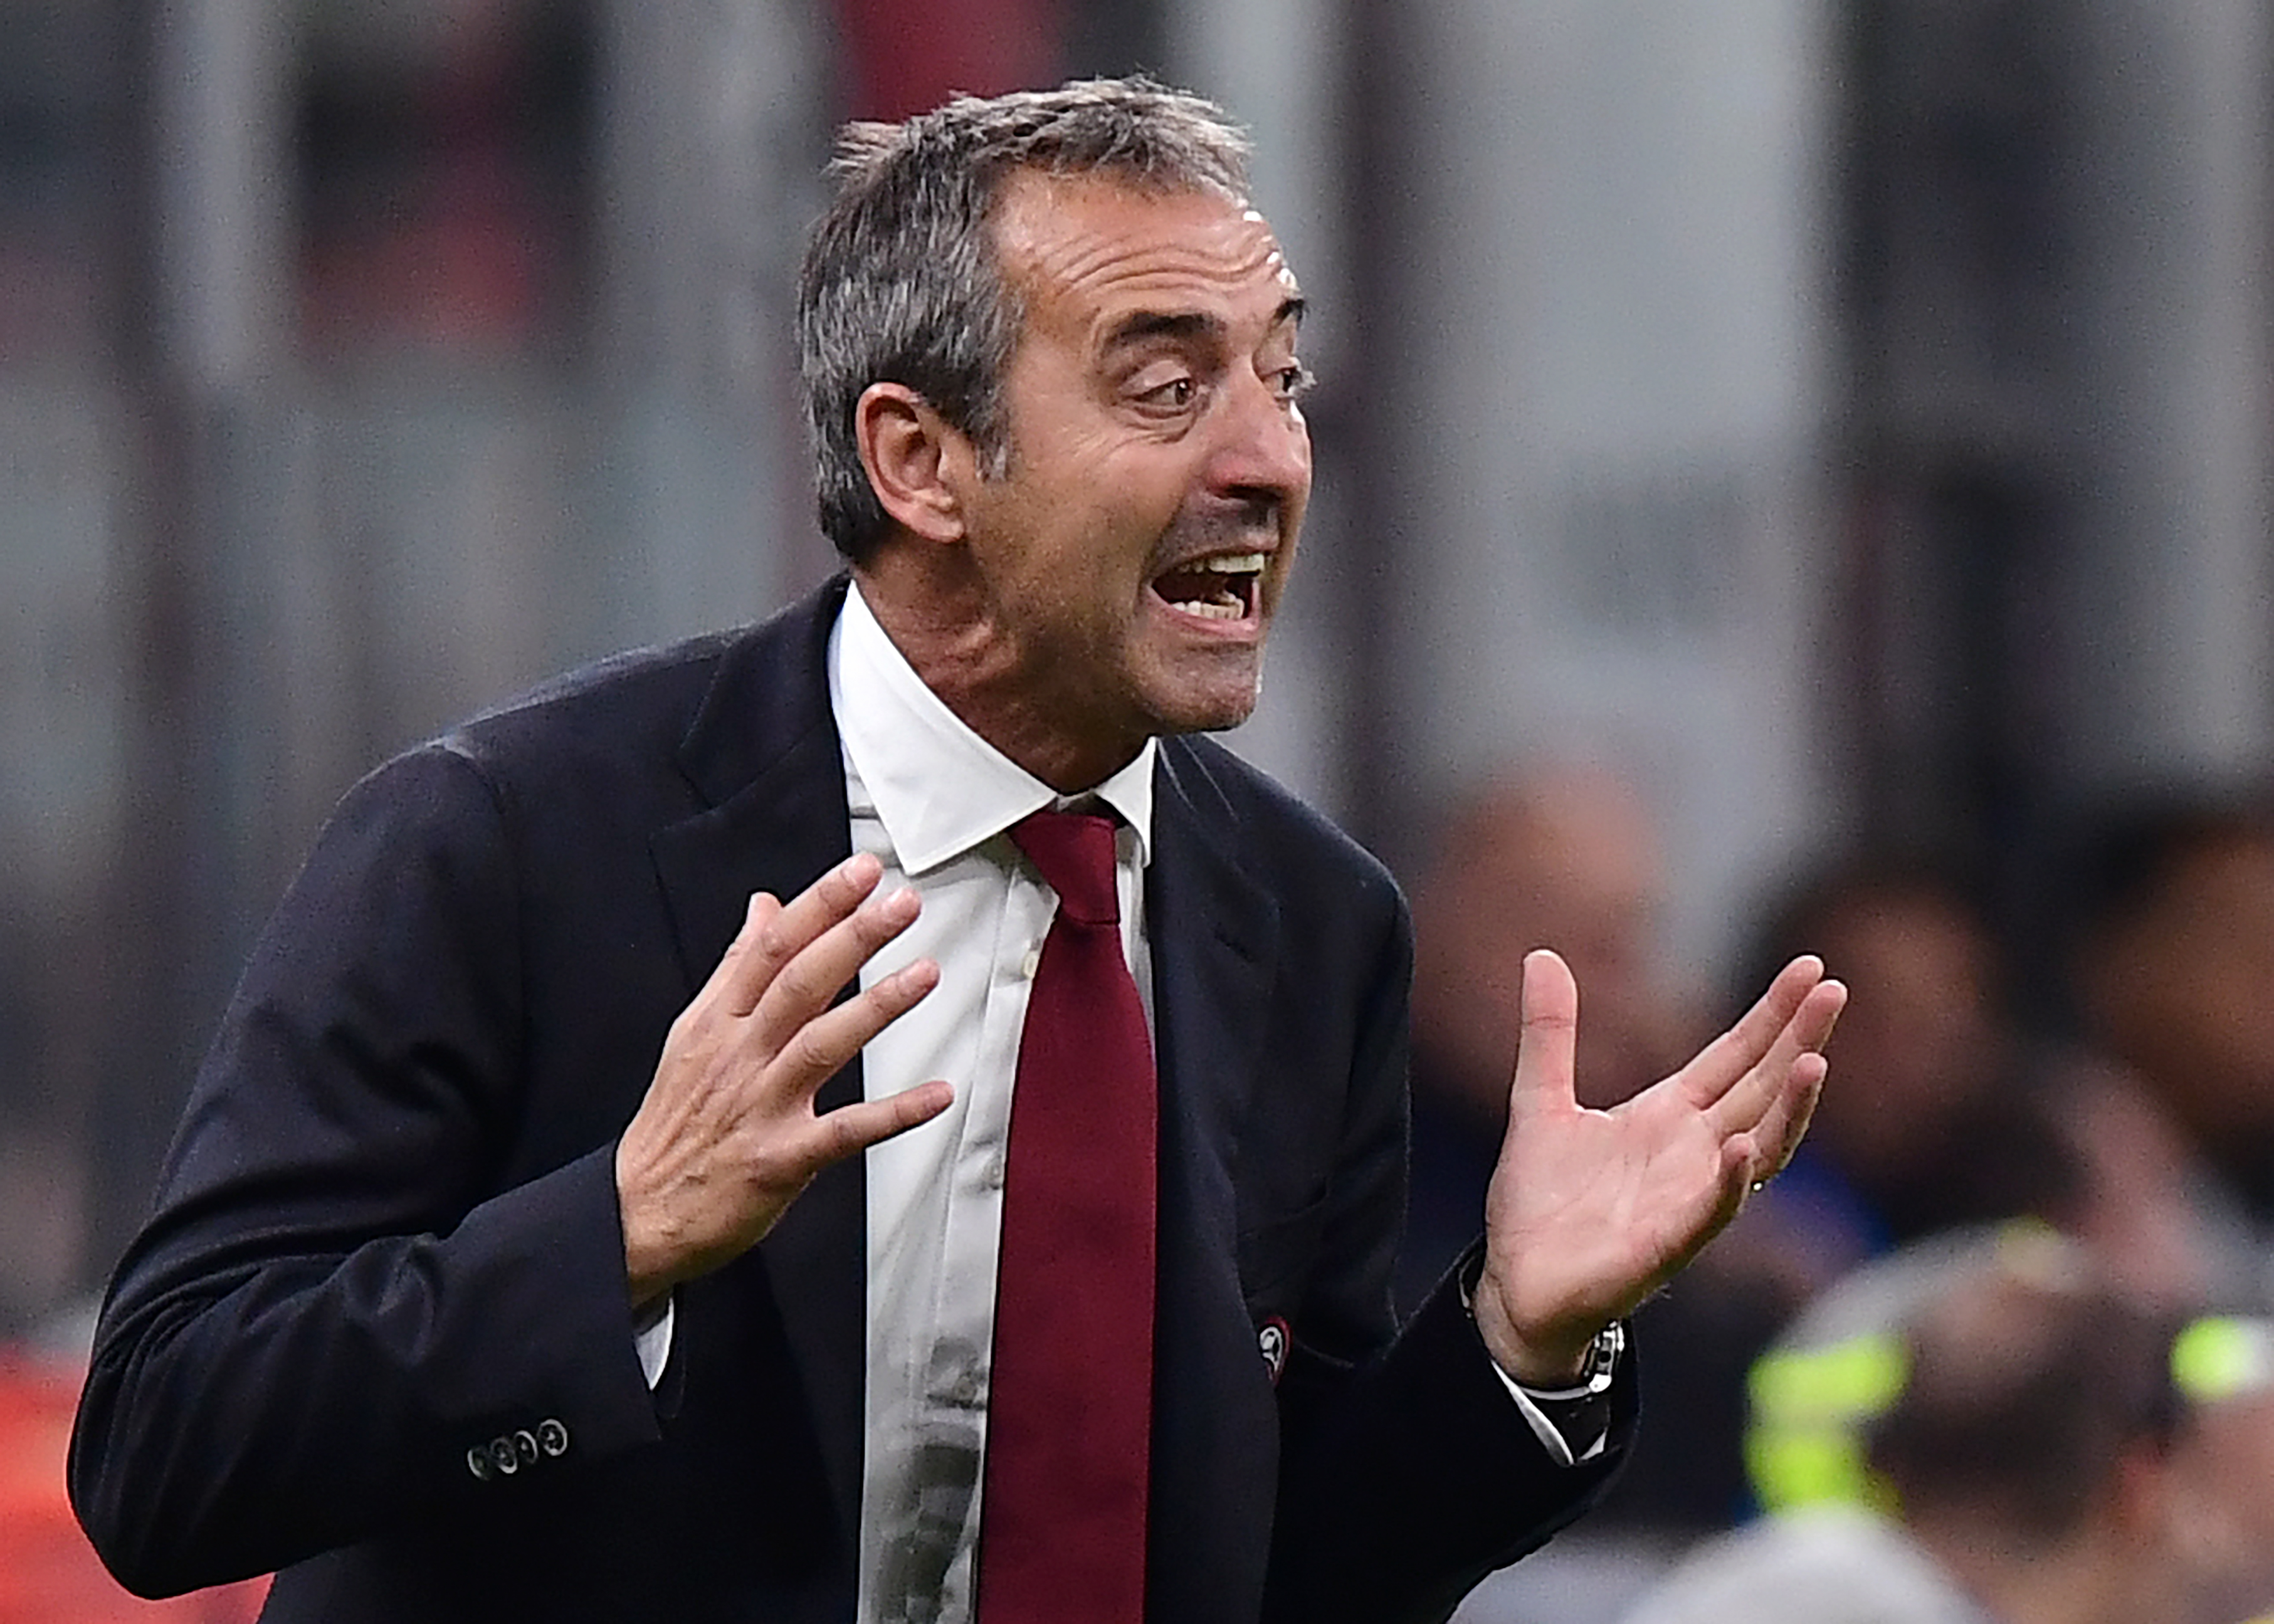 Marco Giampaolo lasted just 111 months at AC Milan (Photo by Miguel MEDINA / AFP) (Photo credit should read MIGUEL MEDINA/AFP/Getty Images)